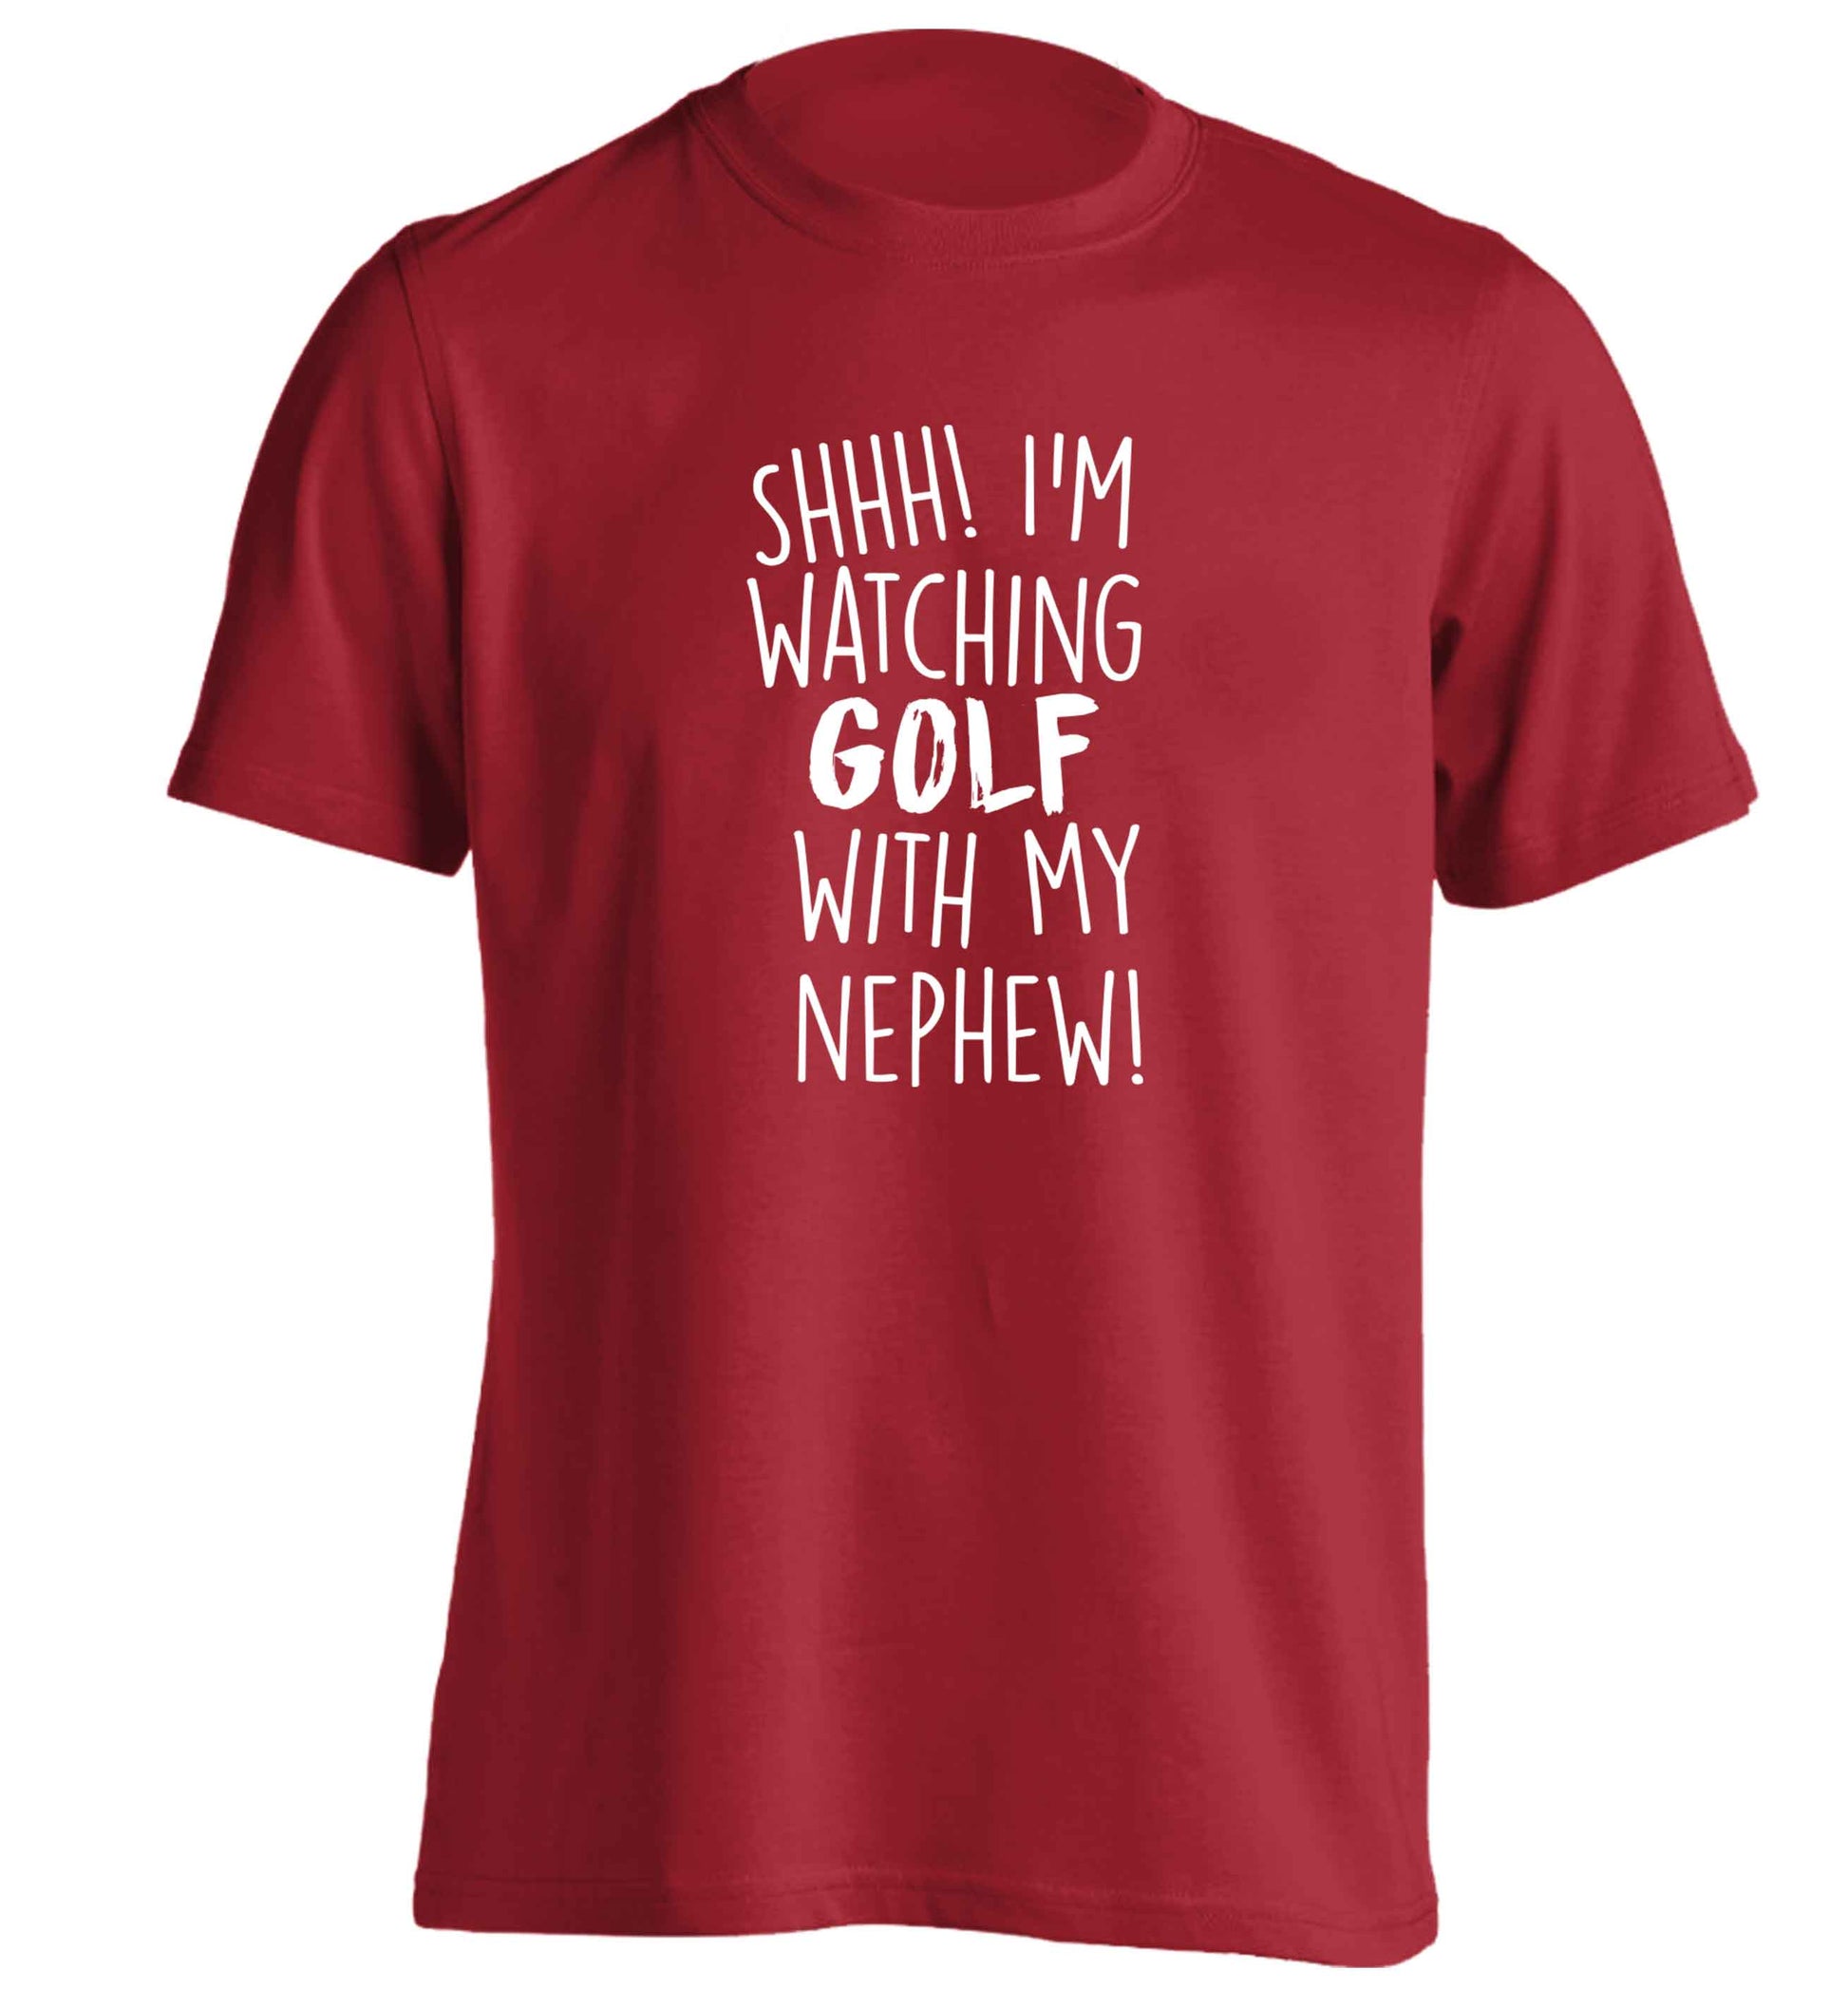 Shh I'm watching golf with my nephew adults unisex red Tshirt 2XL